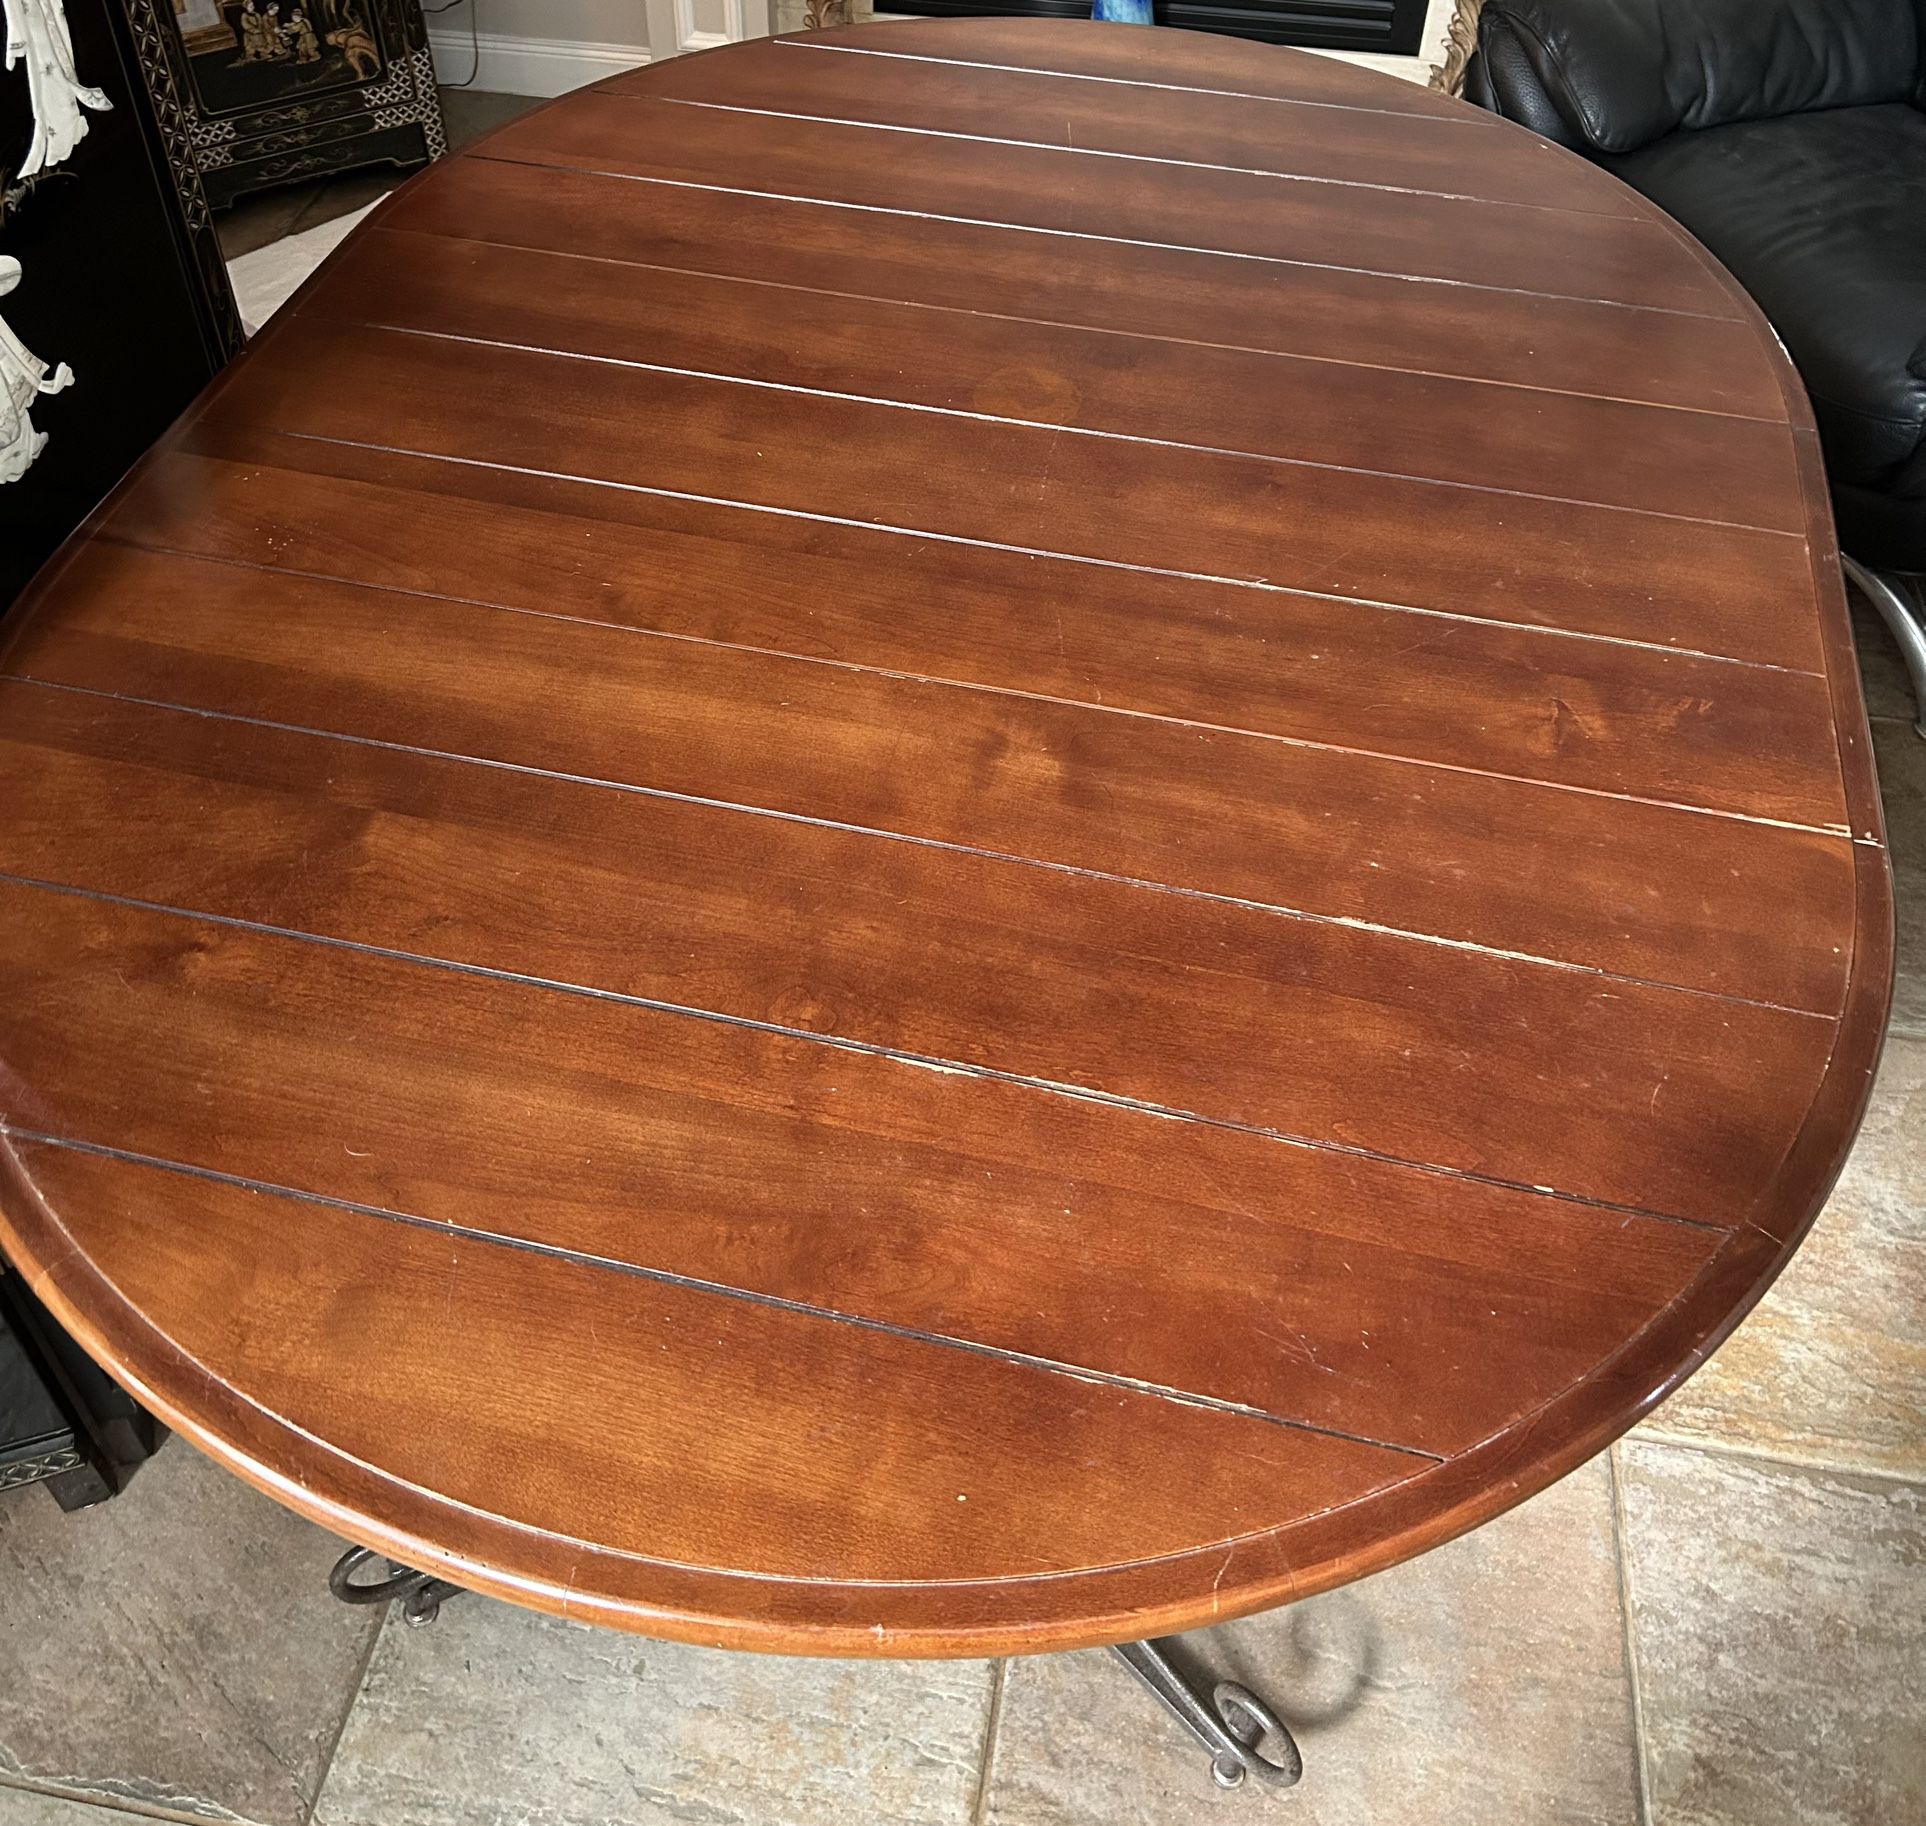 Solid Wood Table With 2 Matching Chairs